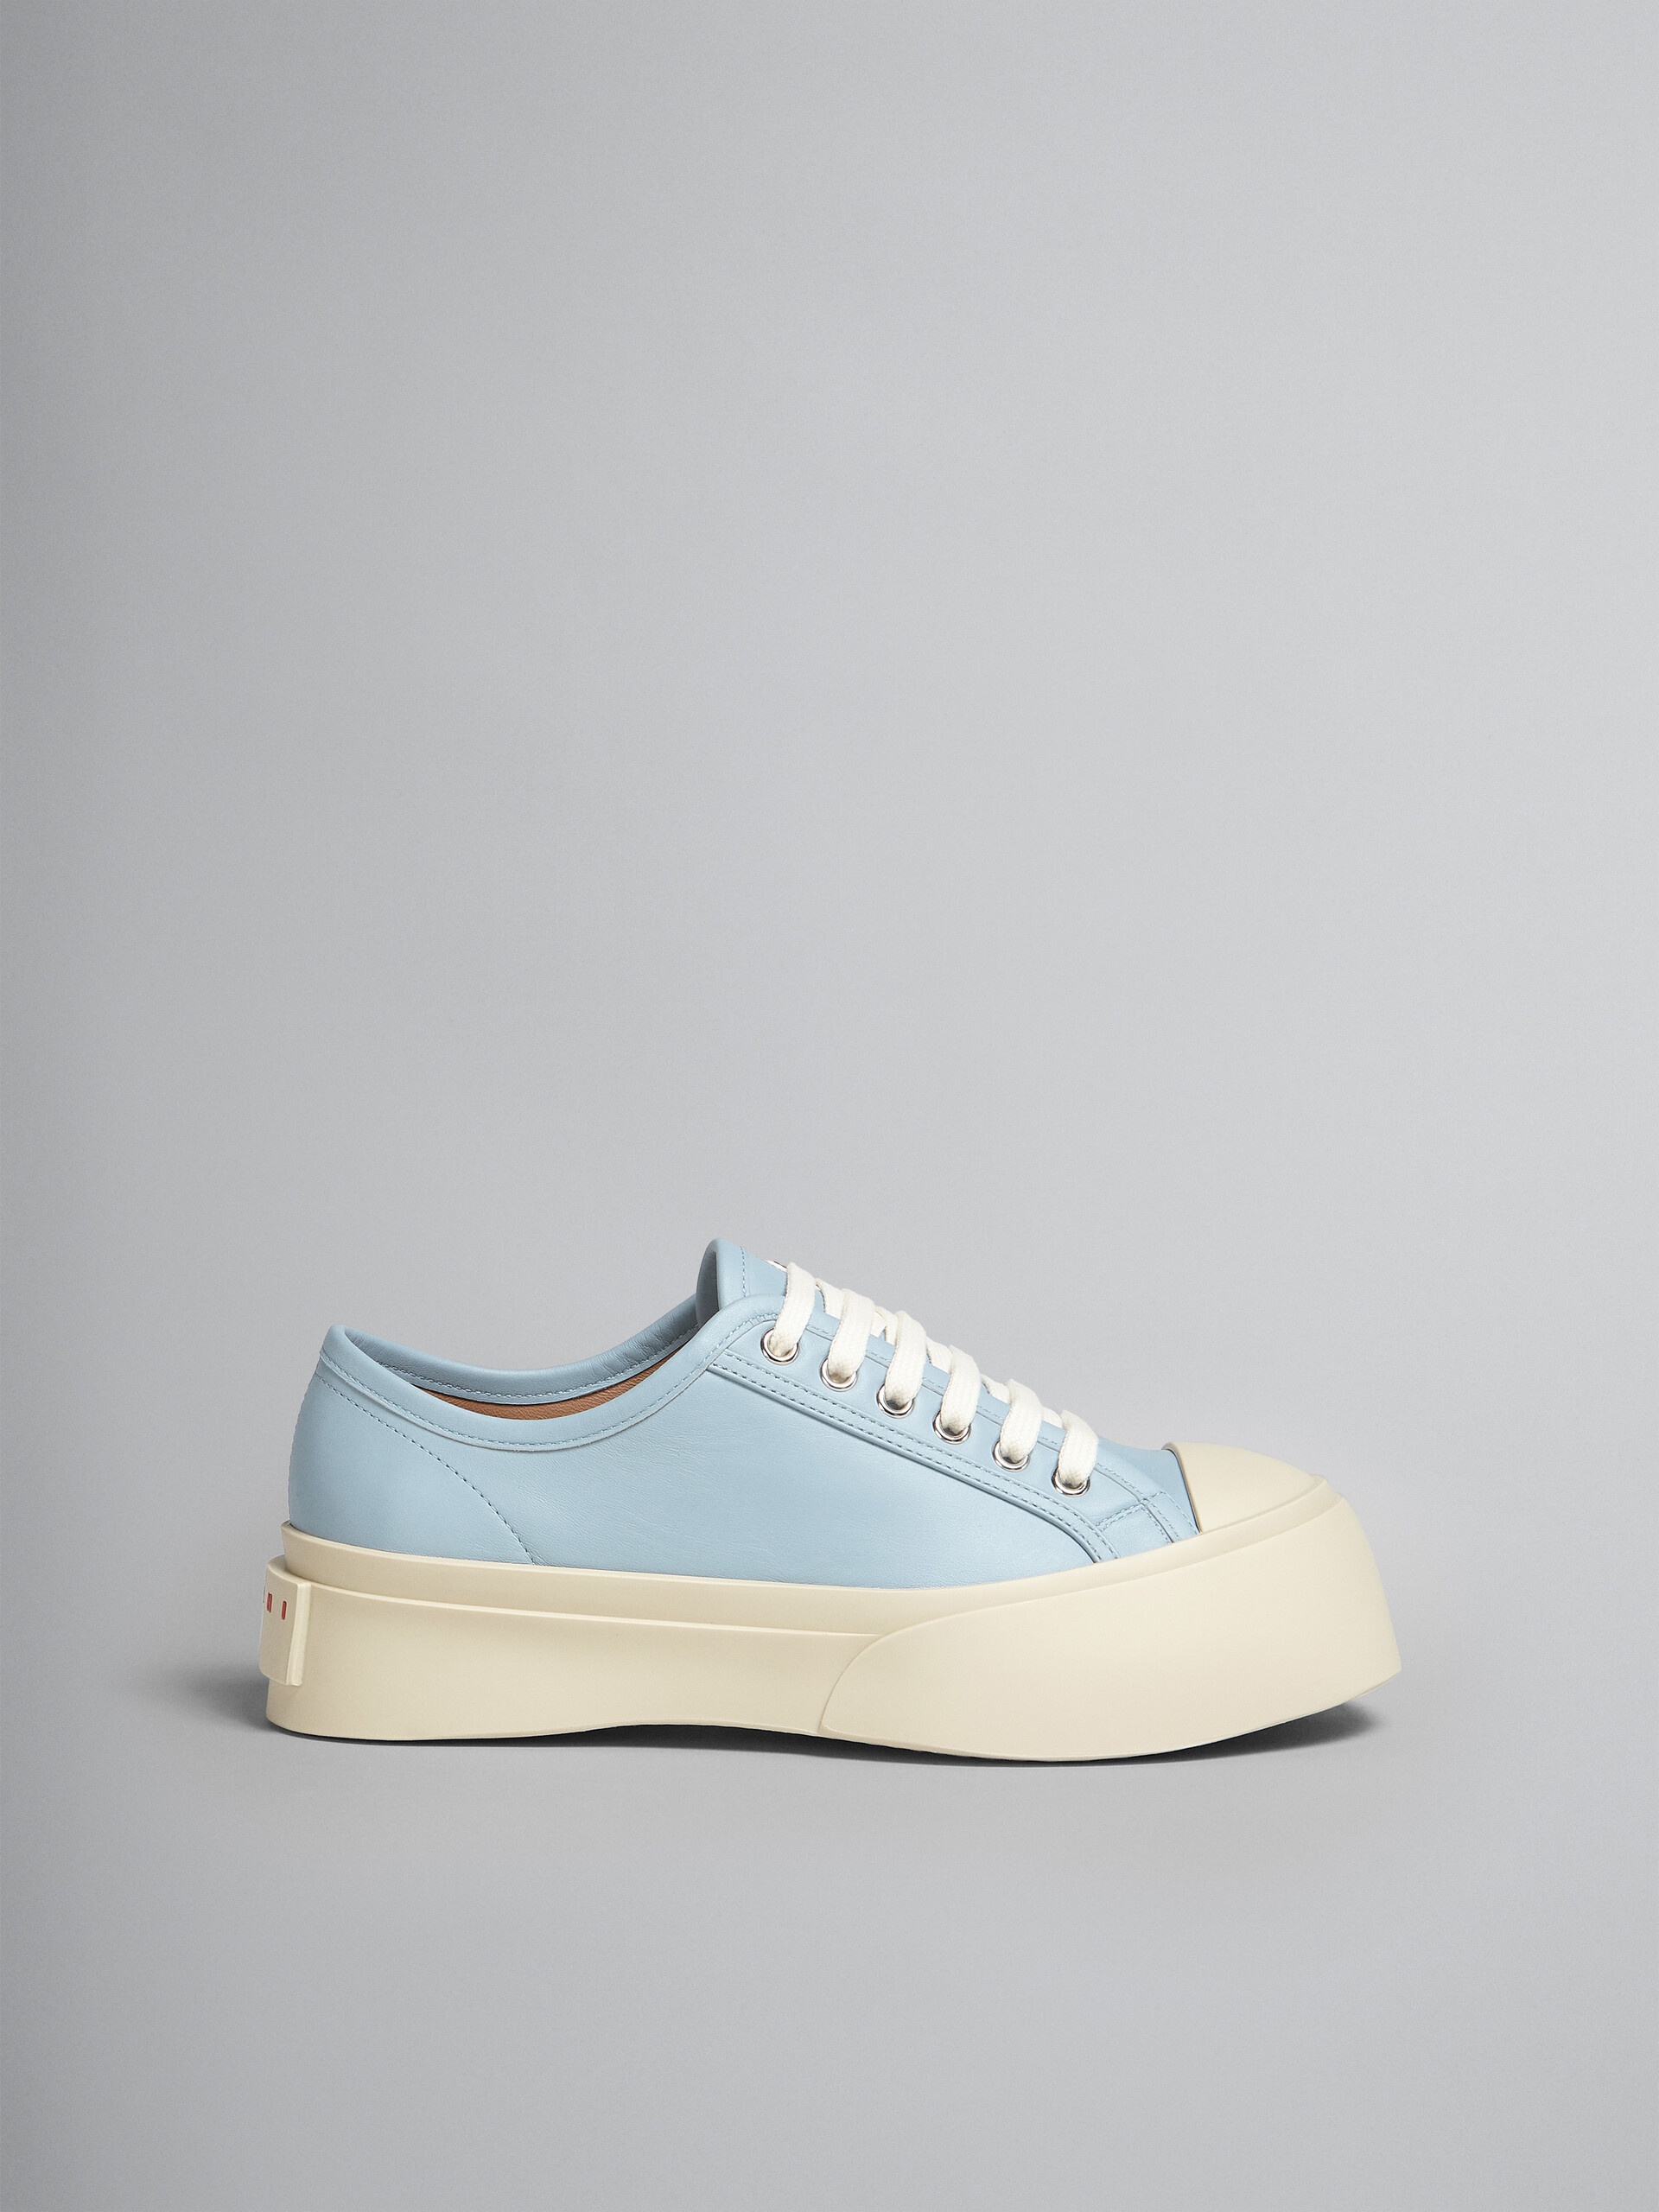 LIGHT BLUE NAPPA LEATHER PABLO LACE-UP SNEAKER - 1